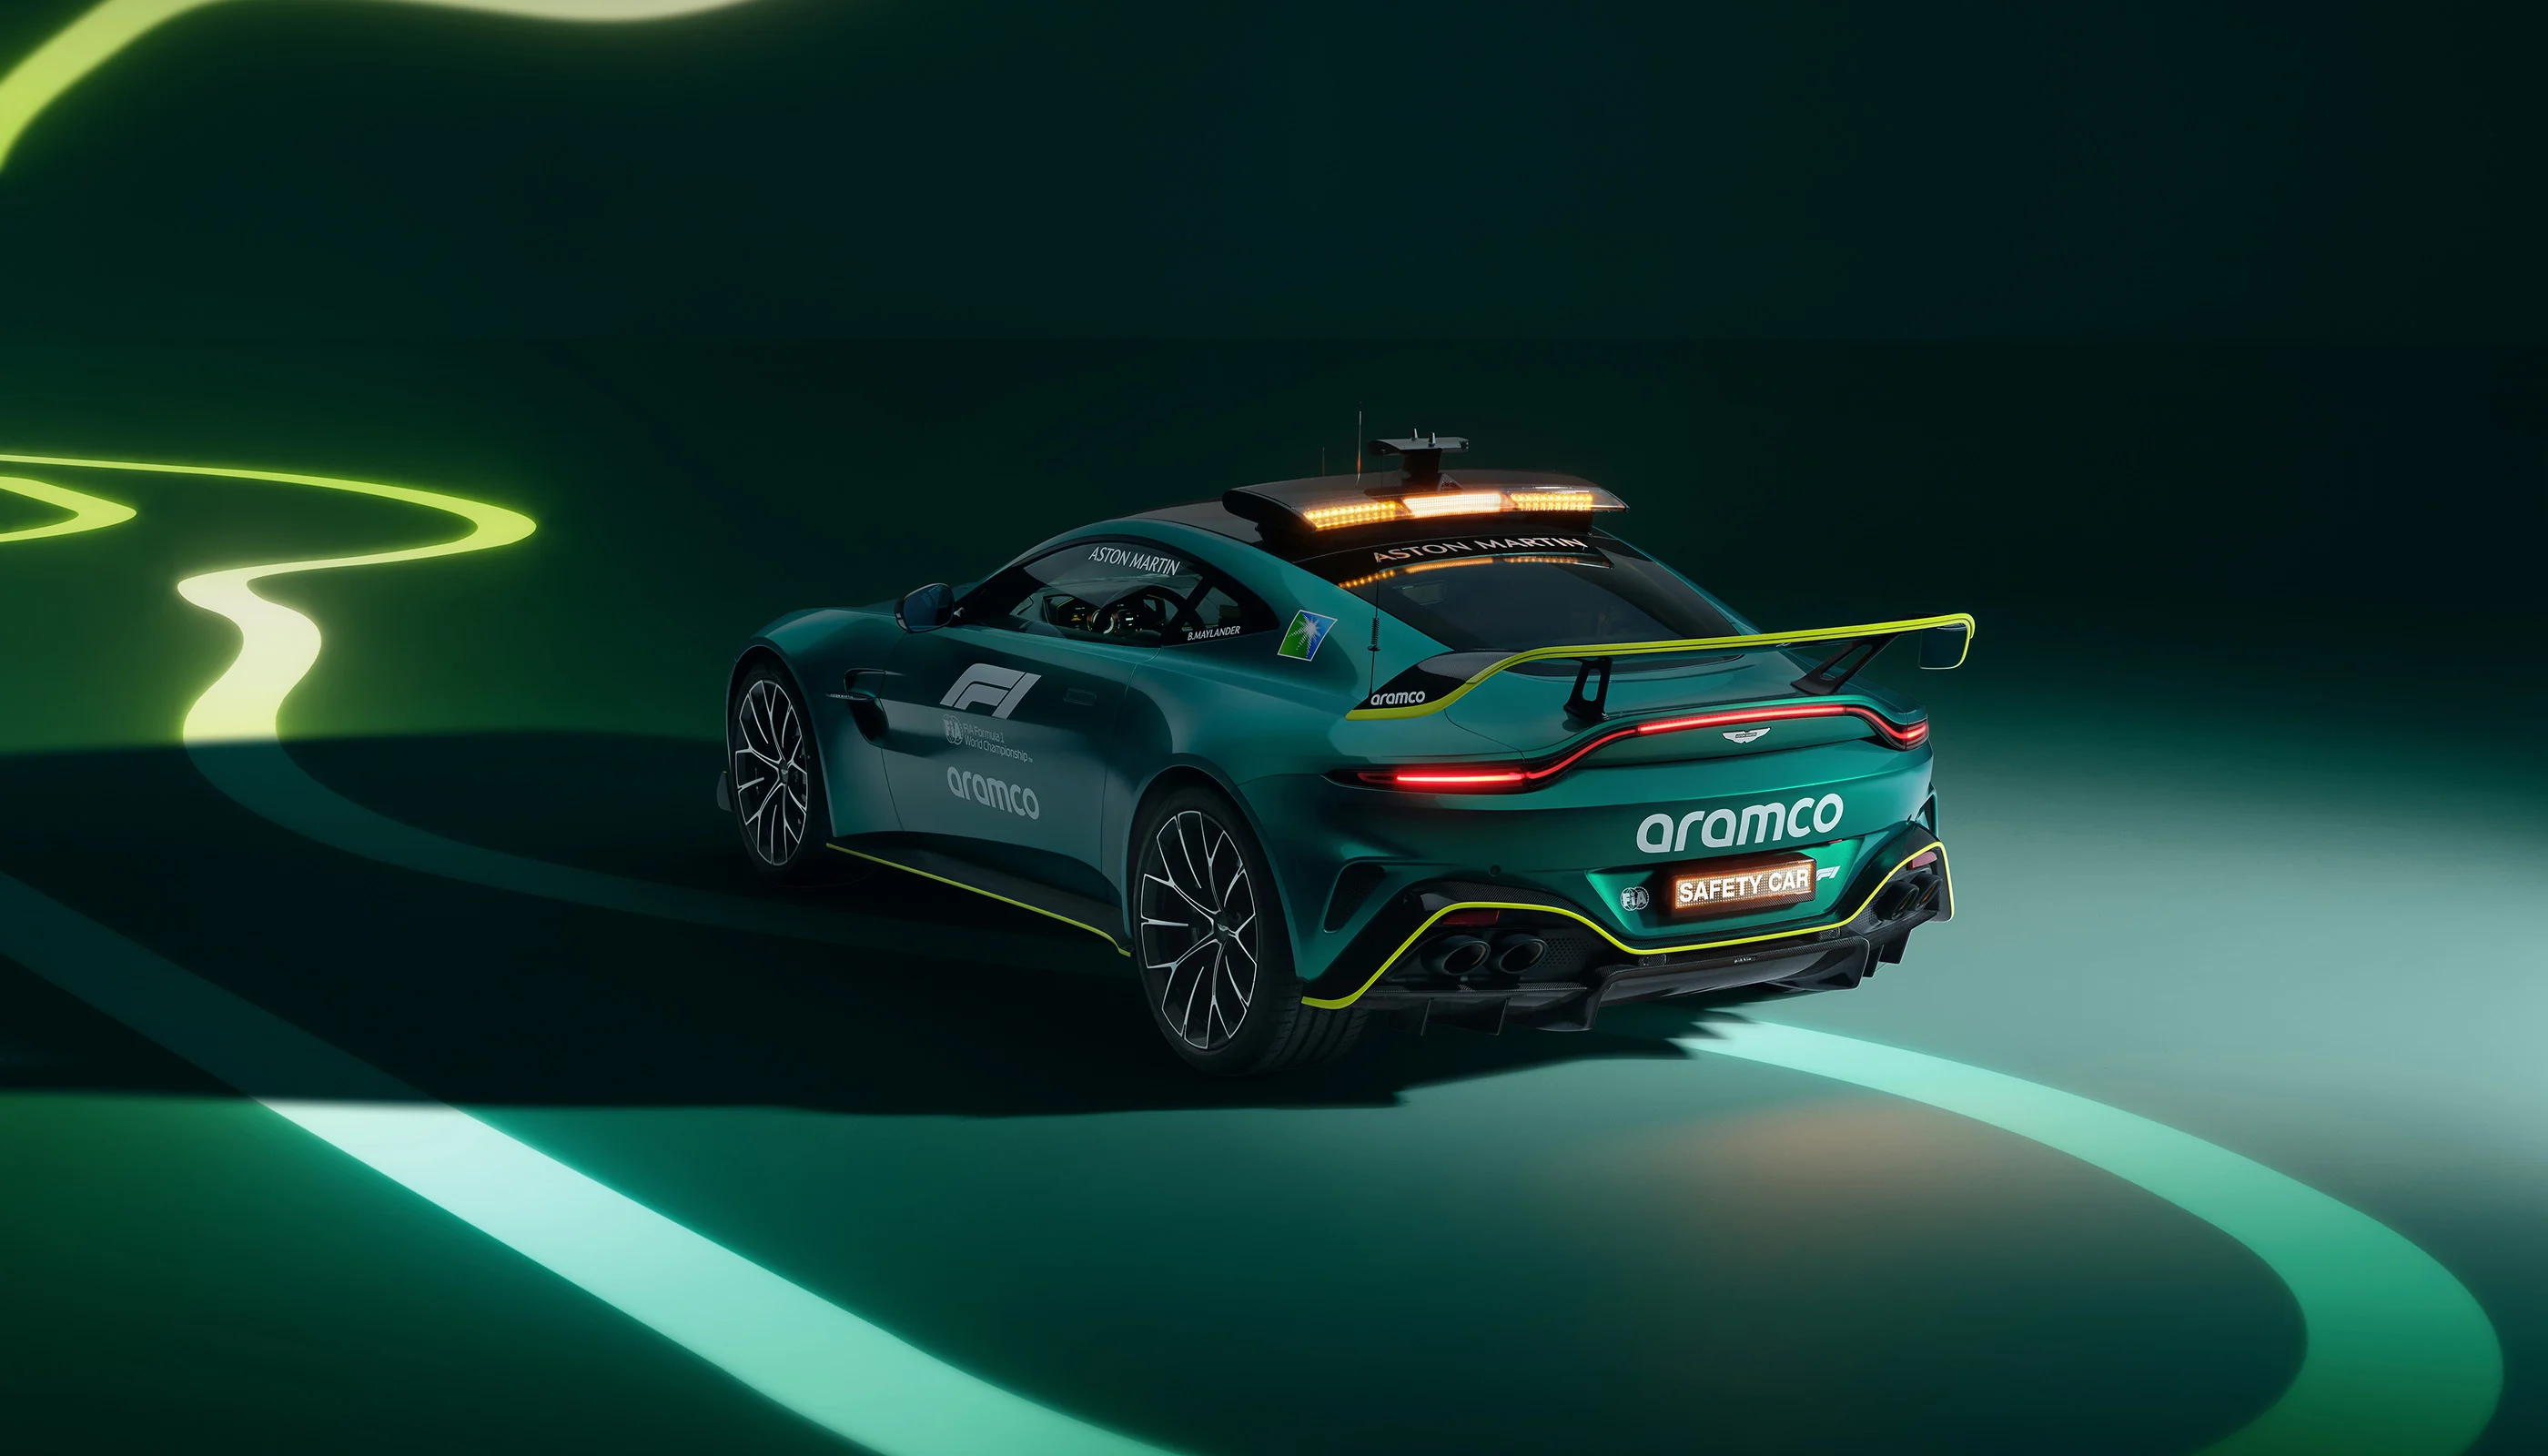 Aston Martin Vantage: here is the new F1 safety car